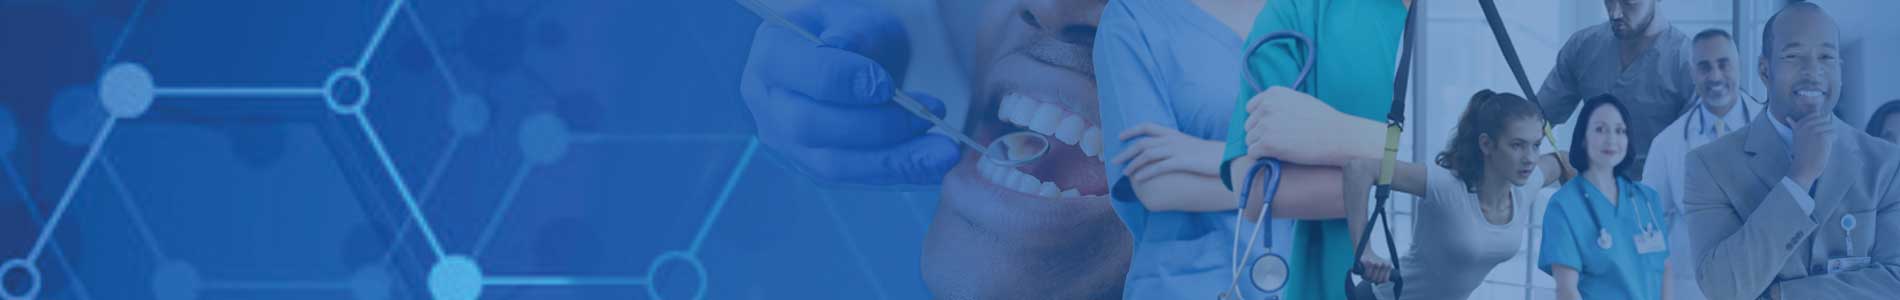 Dental Hygiene Outcomes and Standards banner image